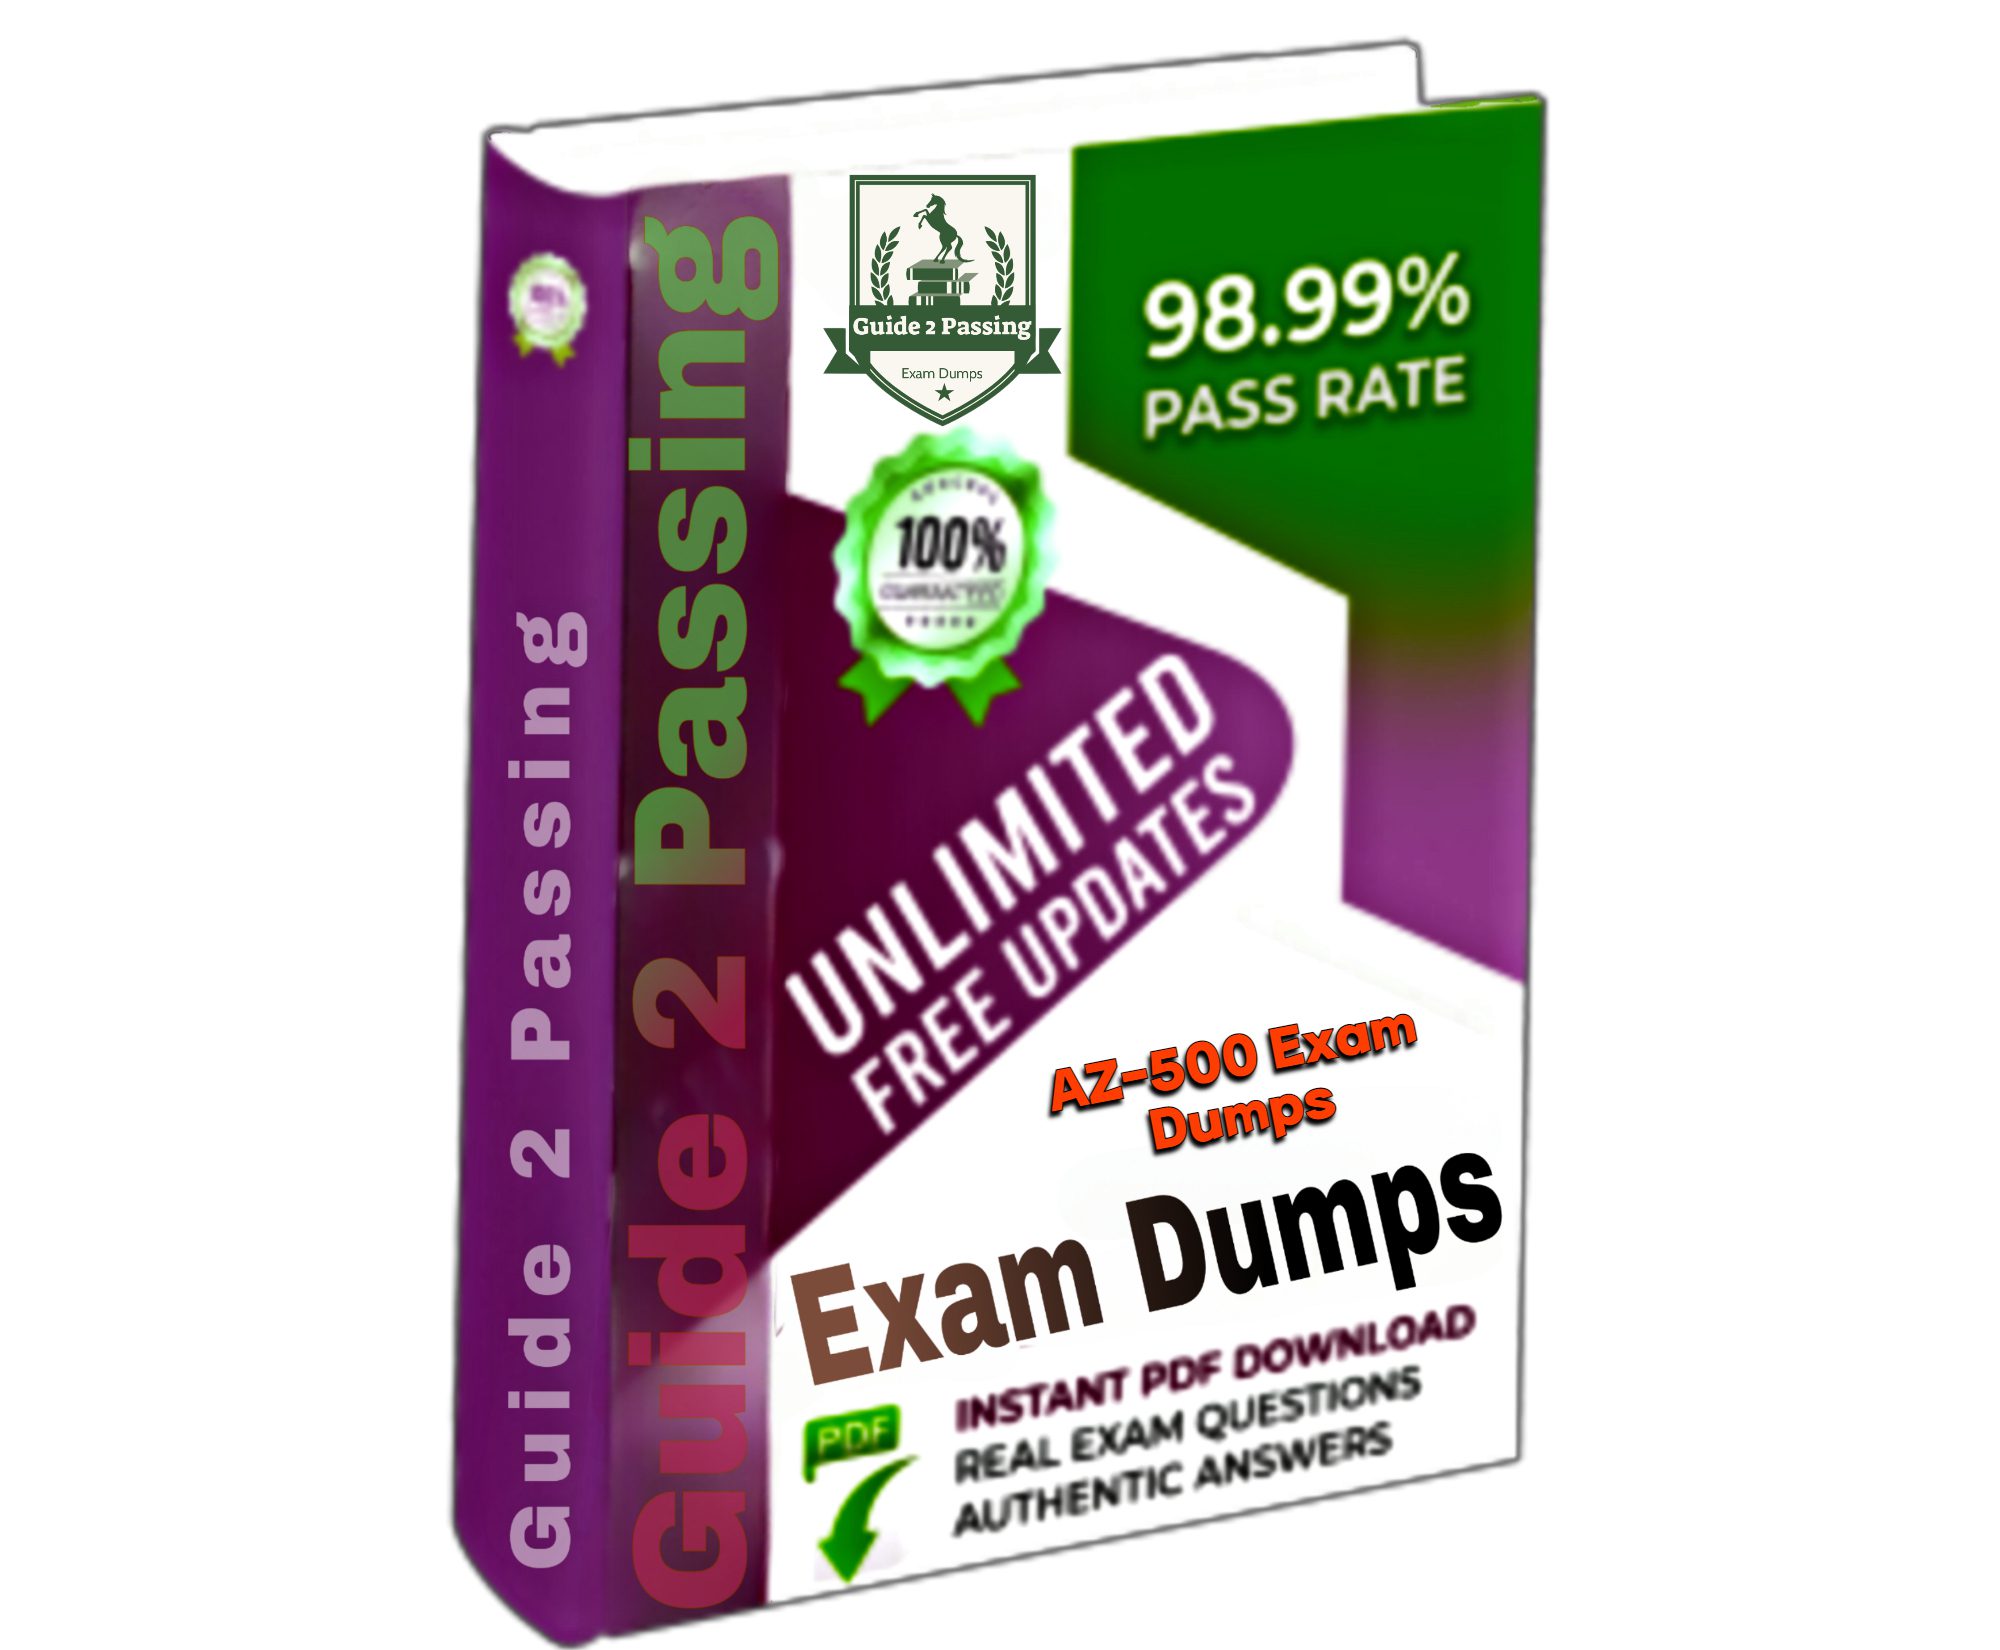 Pass Your Microsoft AZ-500 Exam Dumps From Guide 2 Passing